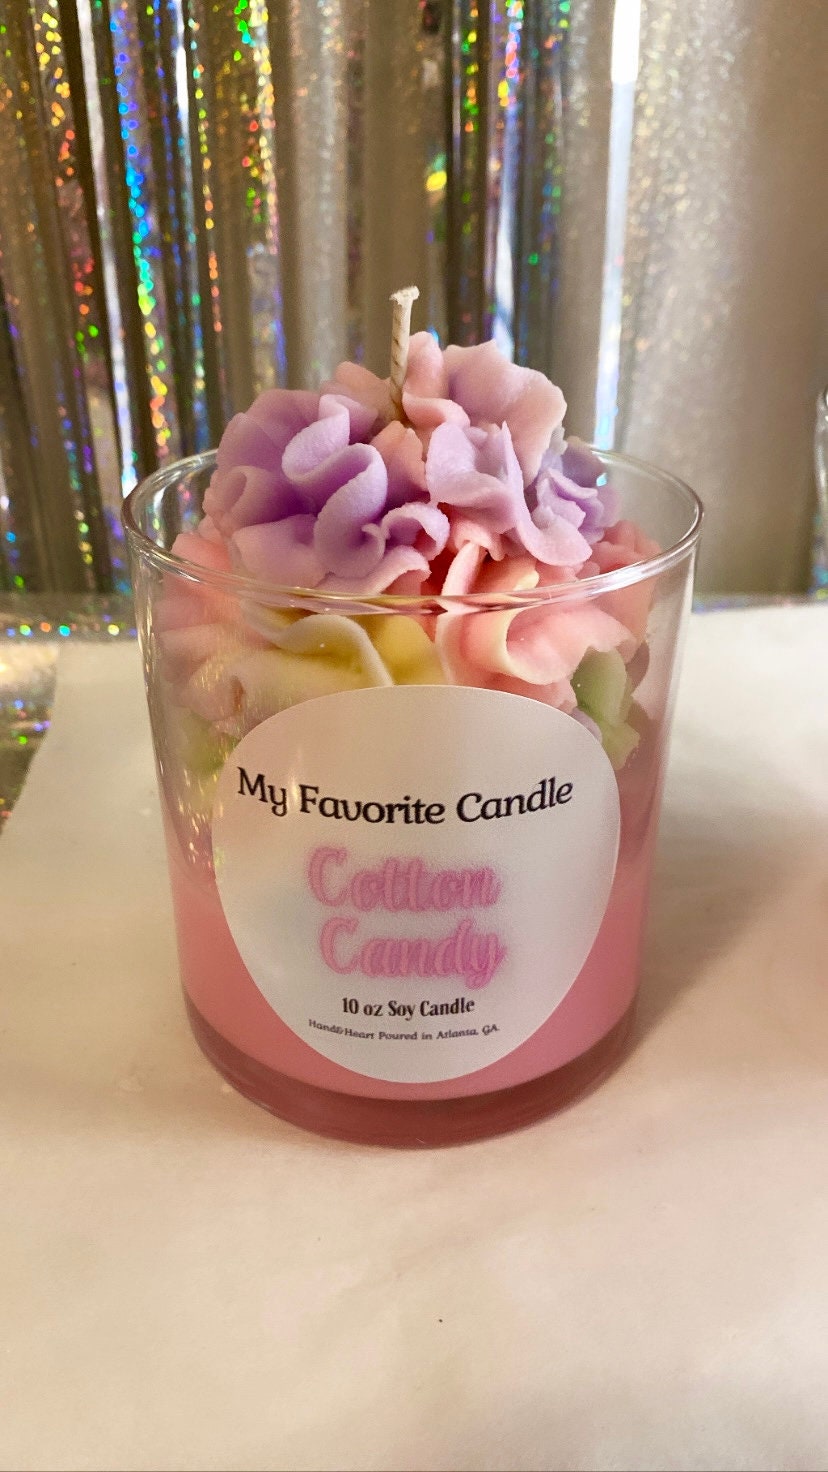 Sweetie - Cotton Candy Scented Soy Candle with Rainbow Quartz